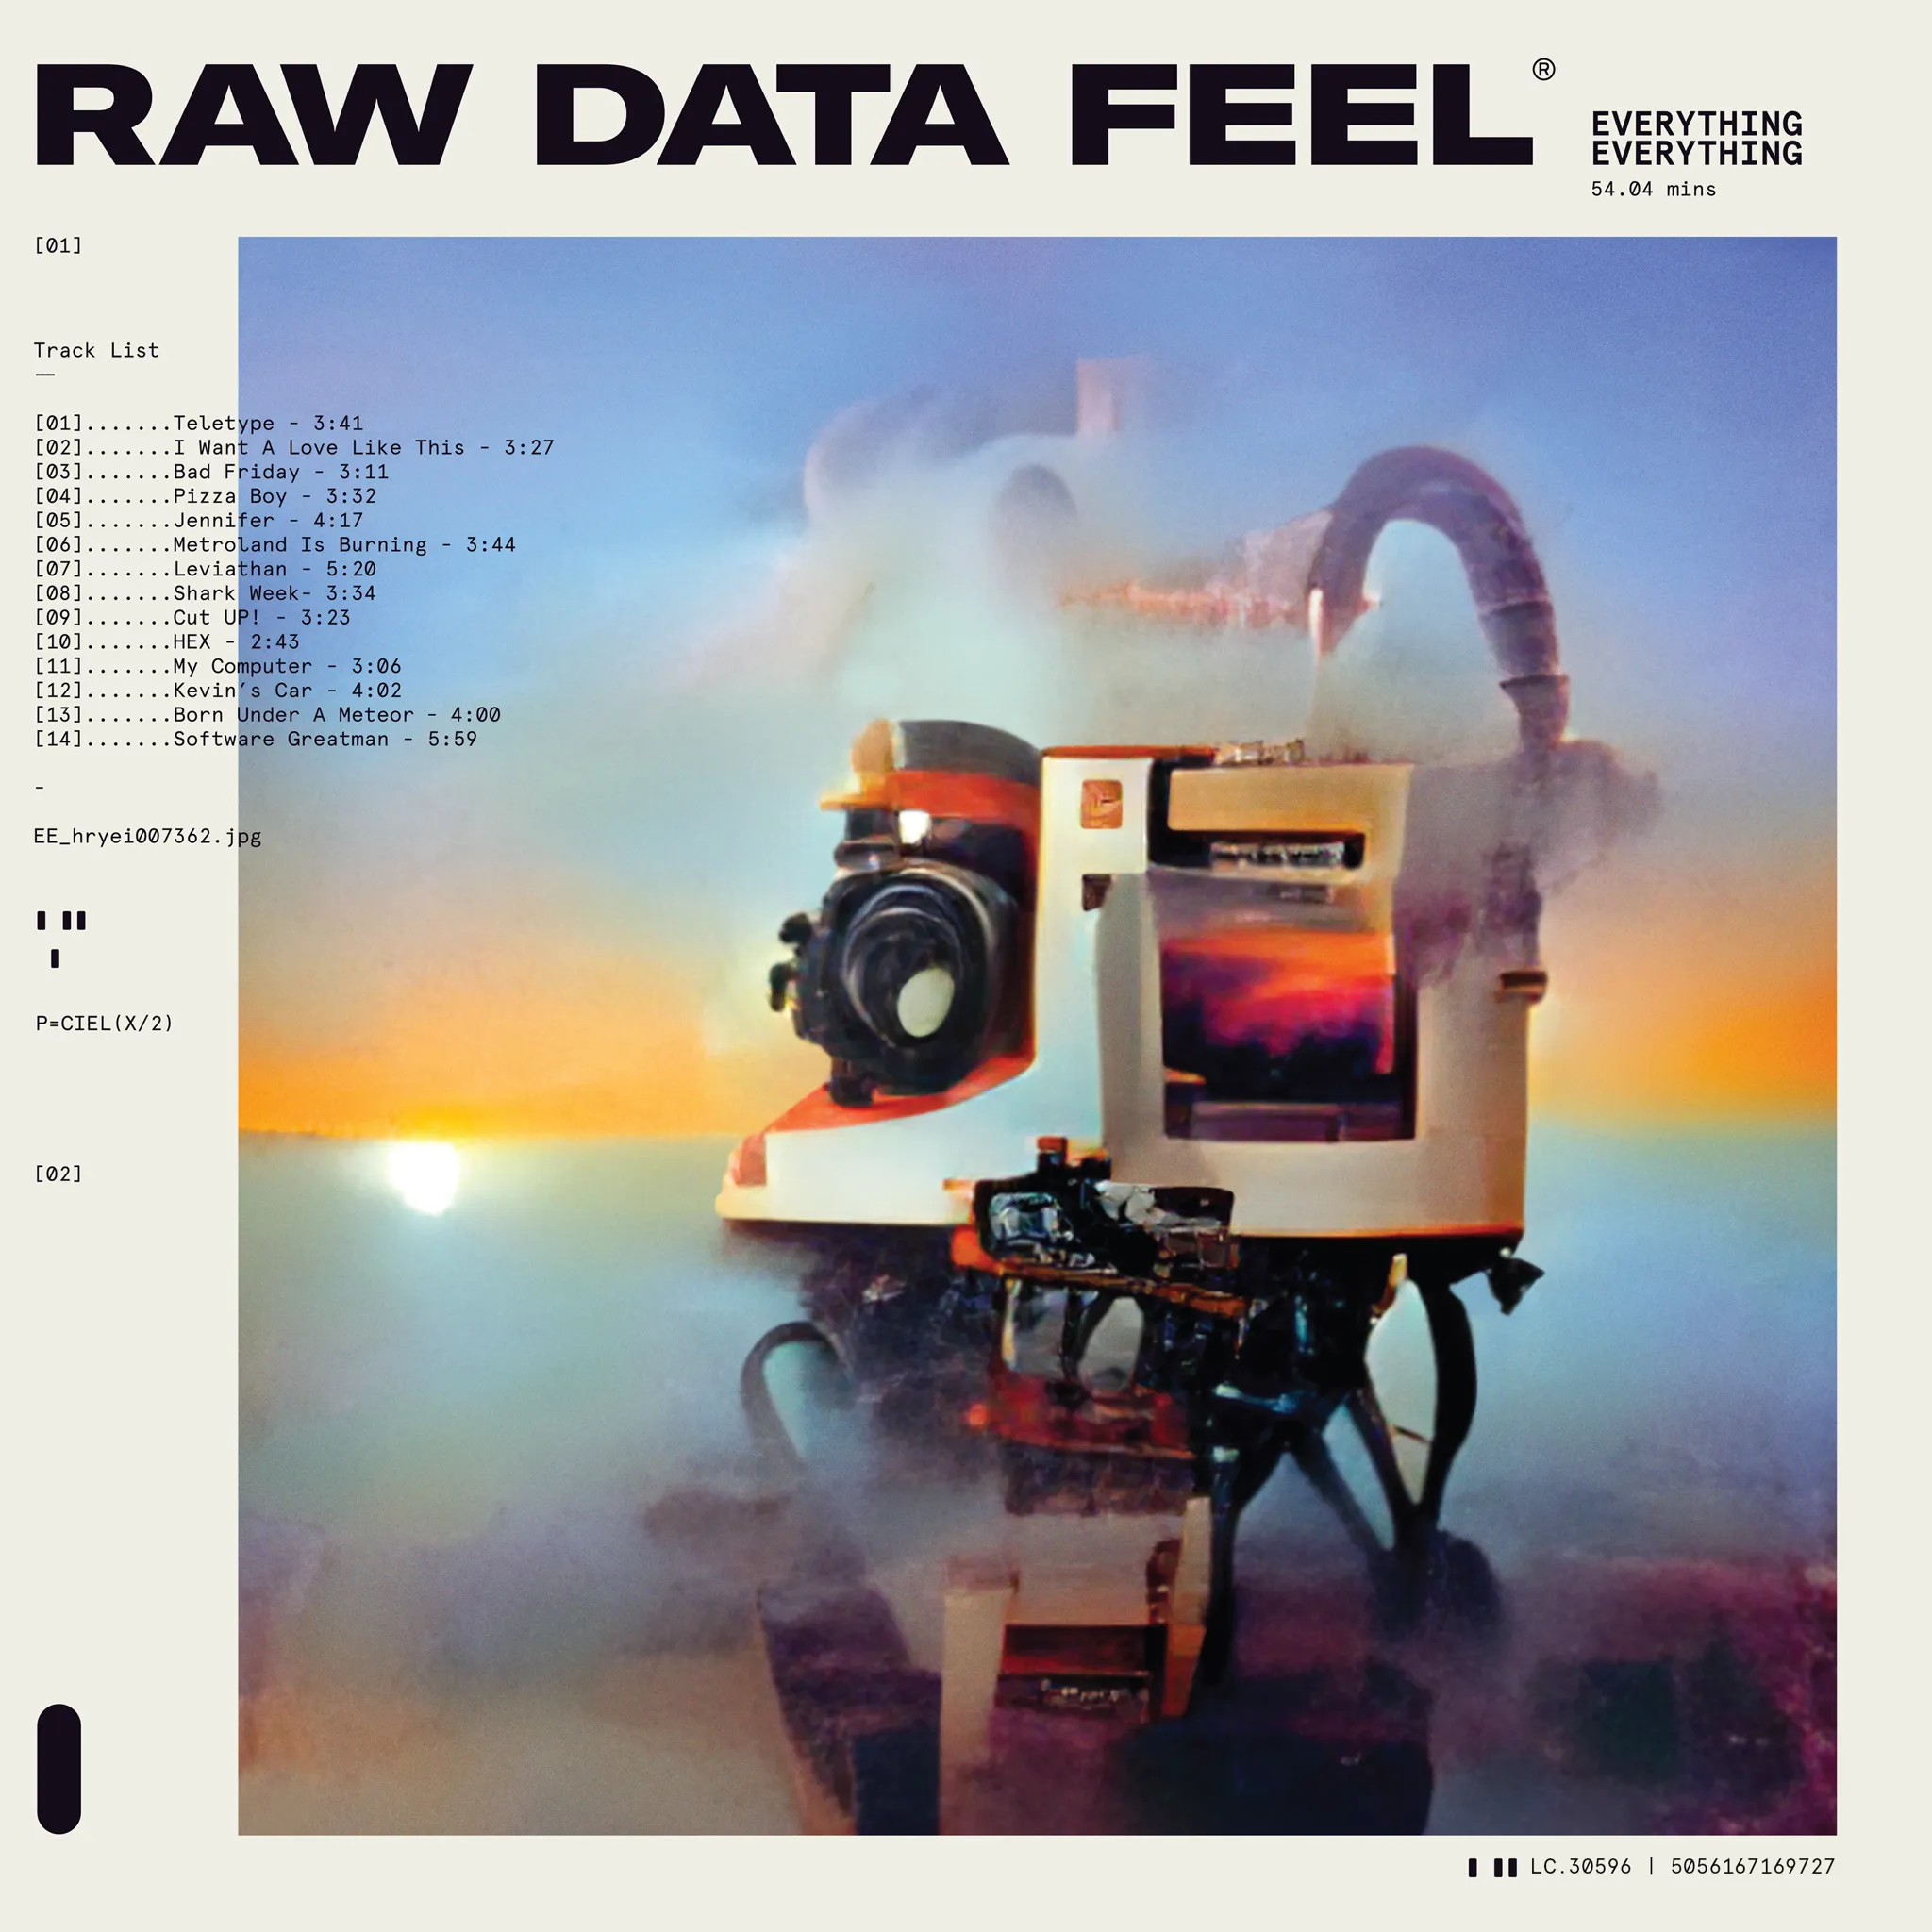 <strong>Everything Everything - Raw Data Feel</strong> (Vinyl LP - clear)